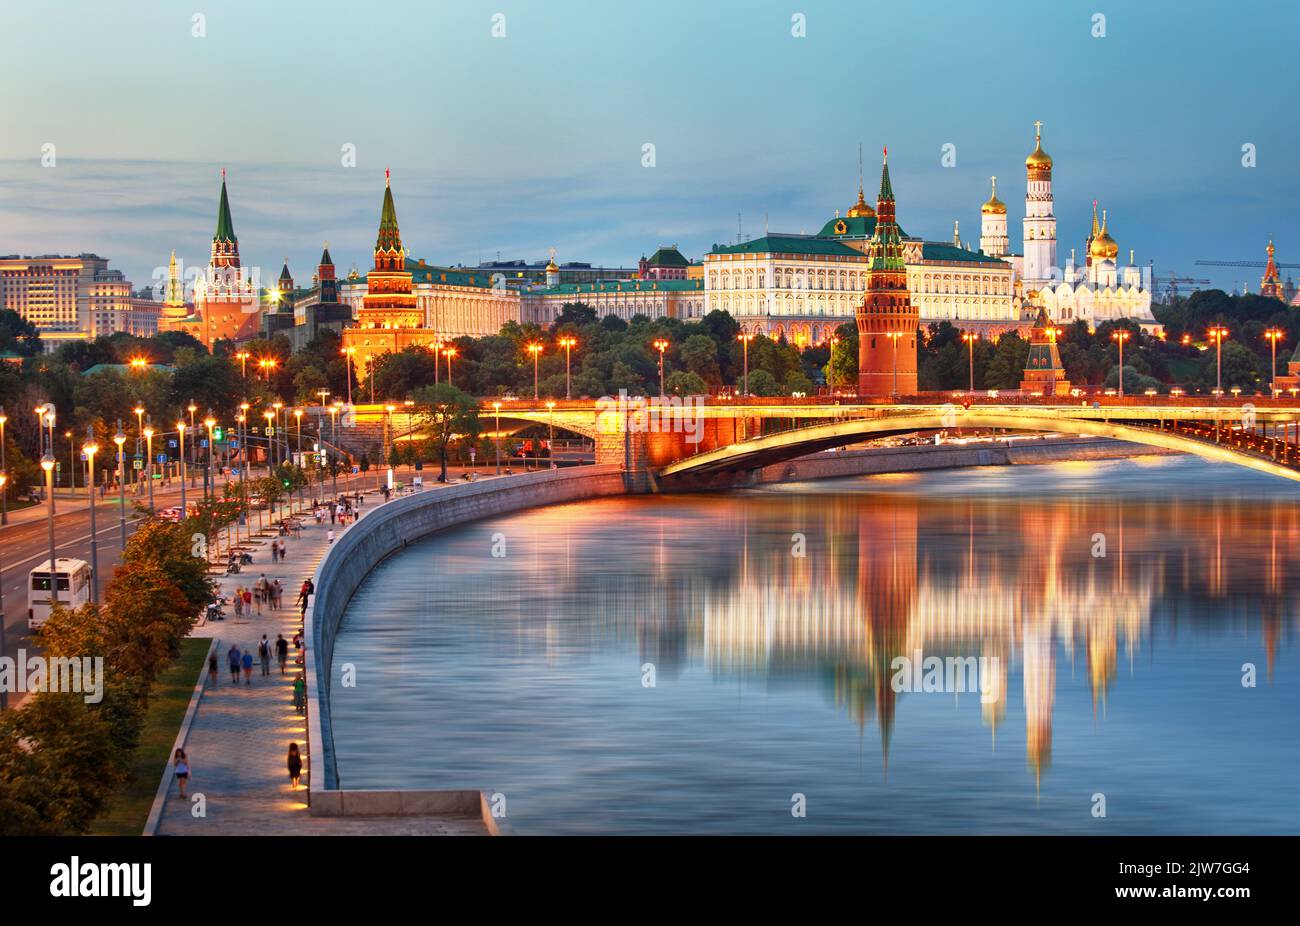 Russia - Moscow city at night with Kremlin Stock Photo